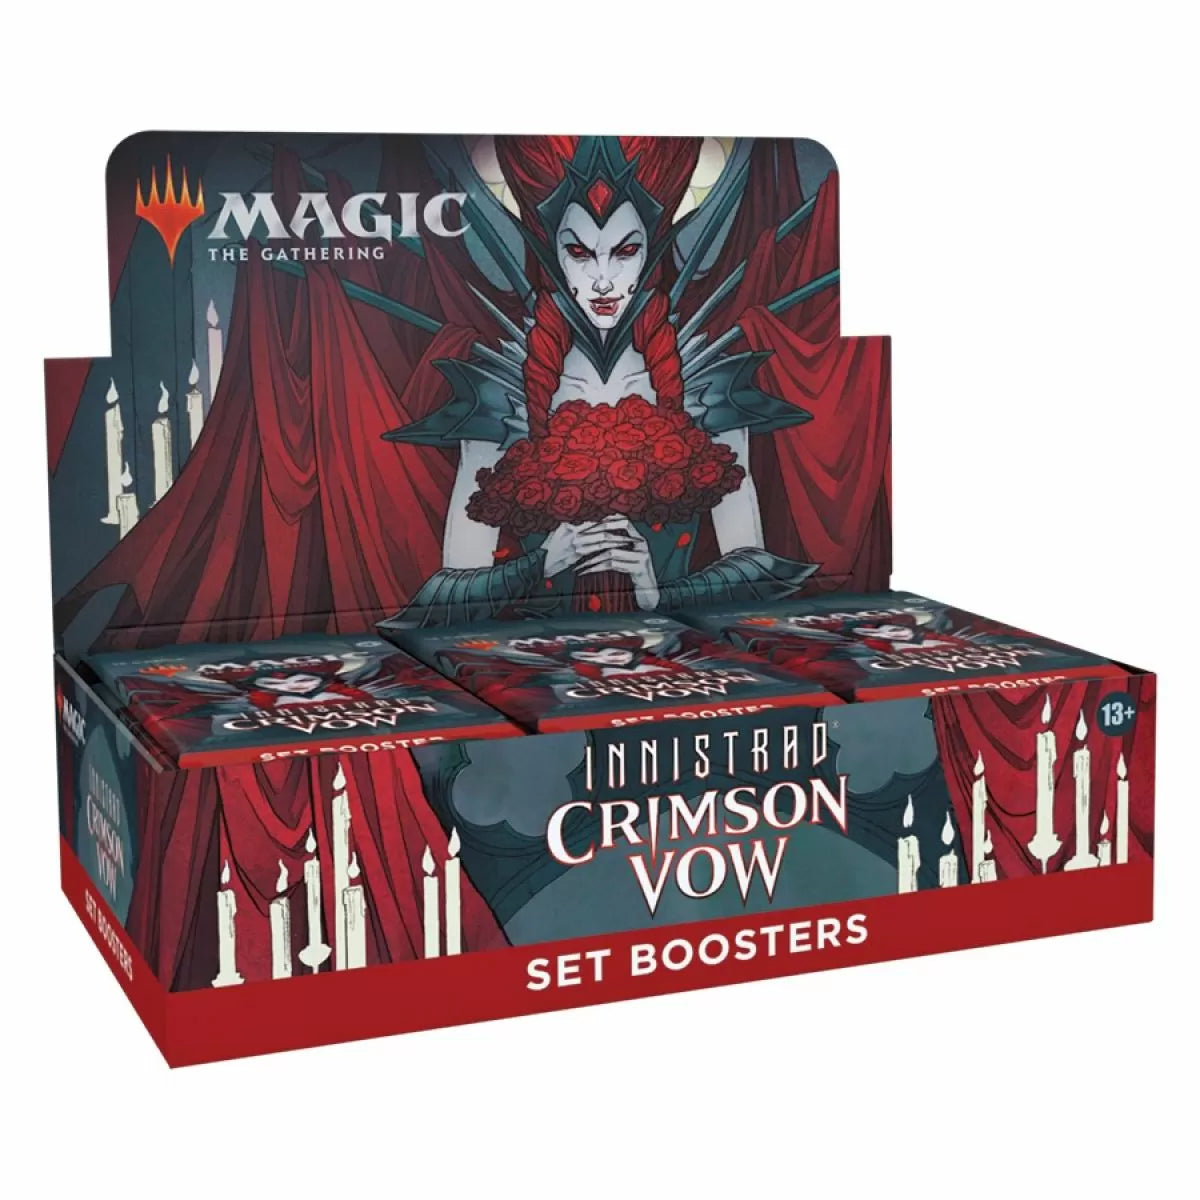 Magic: The Gathering - Innistrad Crimson Vow Set Booster Box *Sealed*